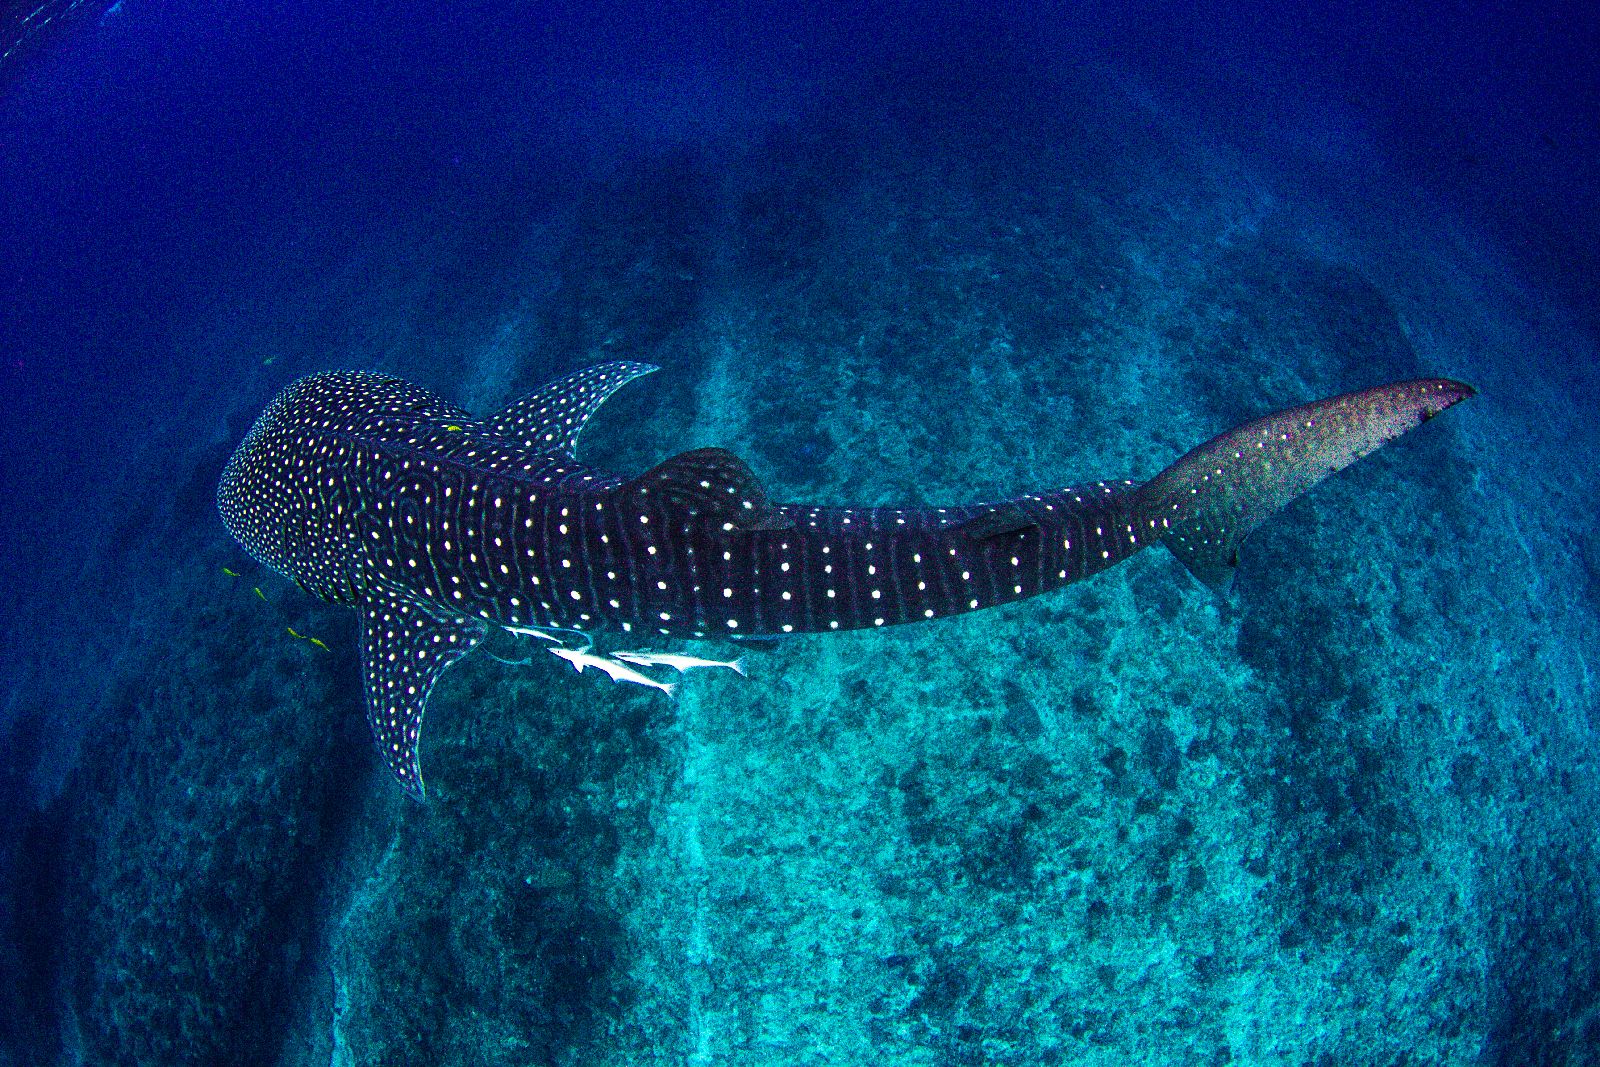 A whale shark in Australia's Ningaloo Reef seen from above